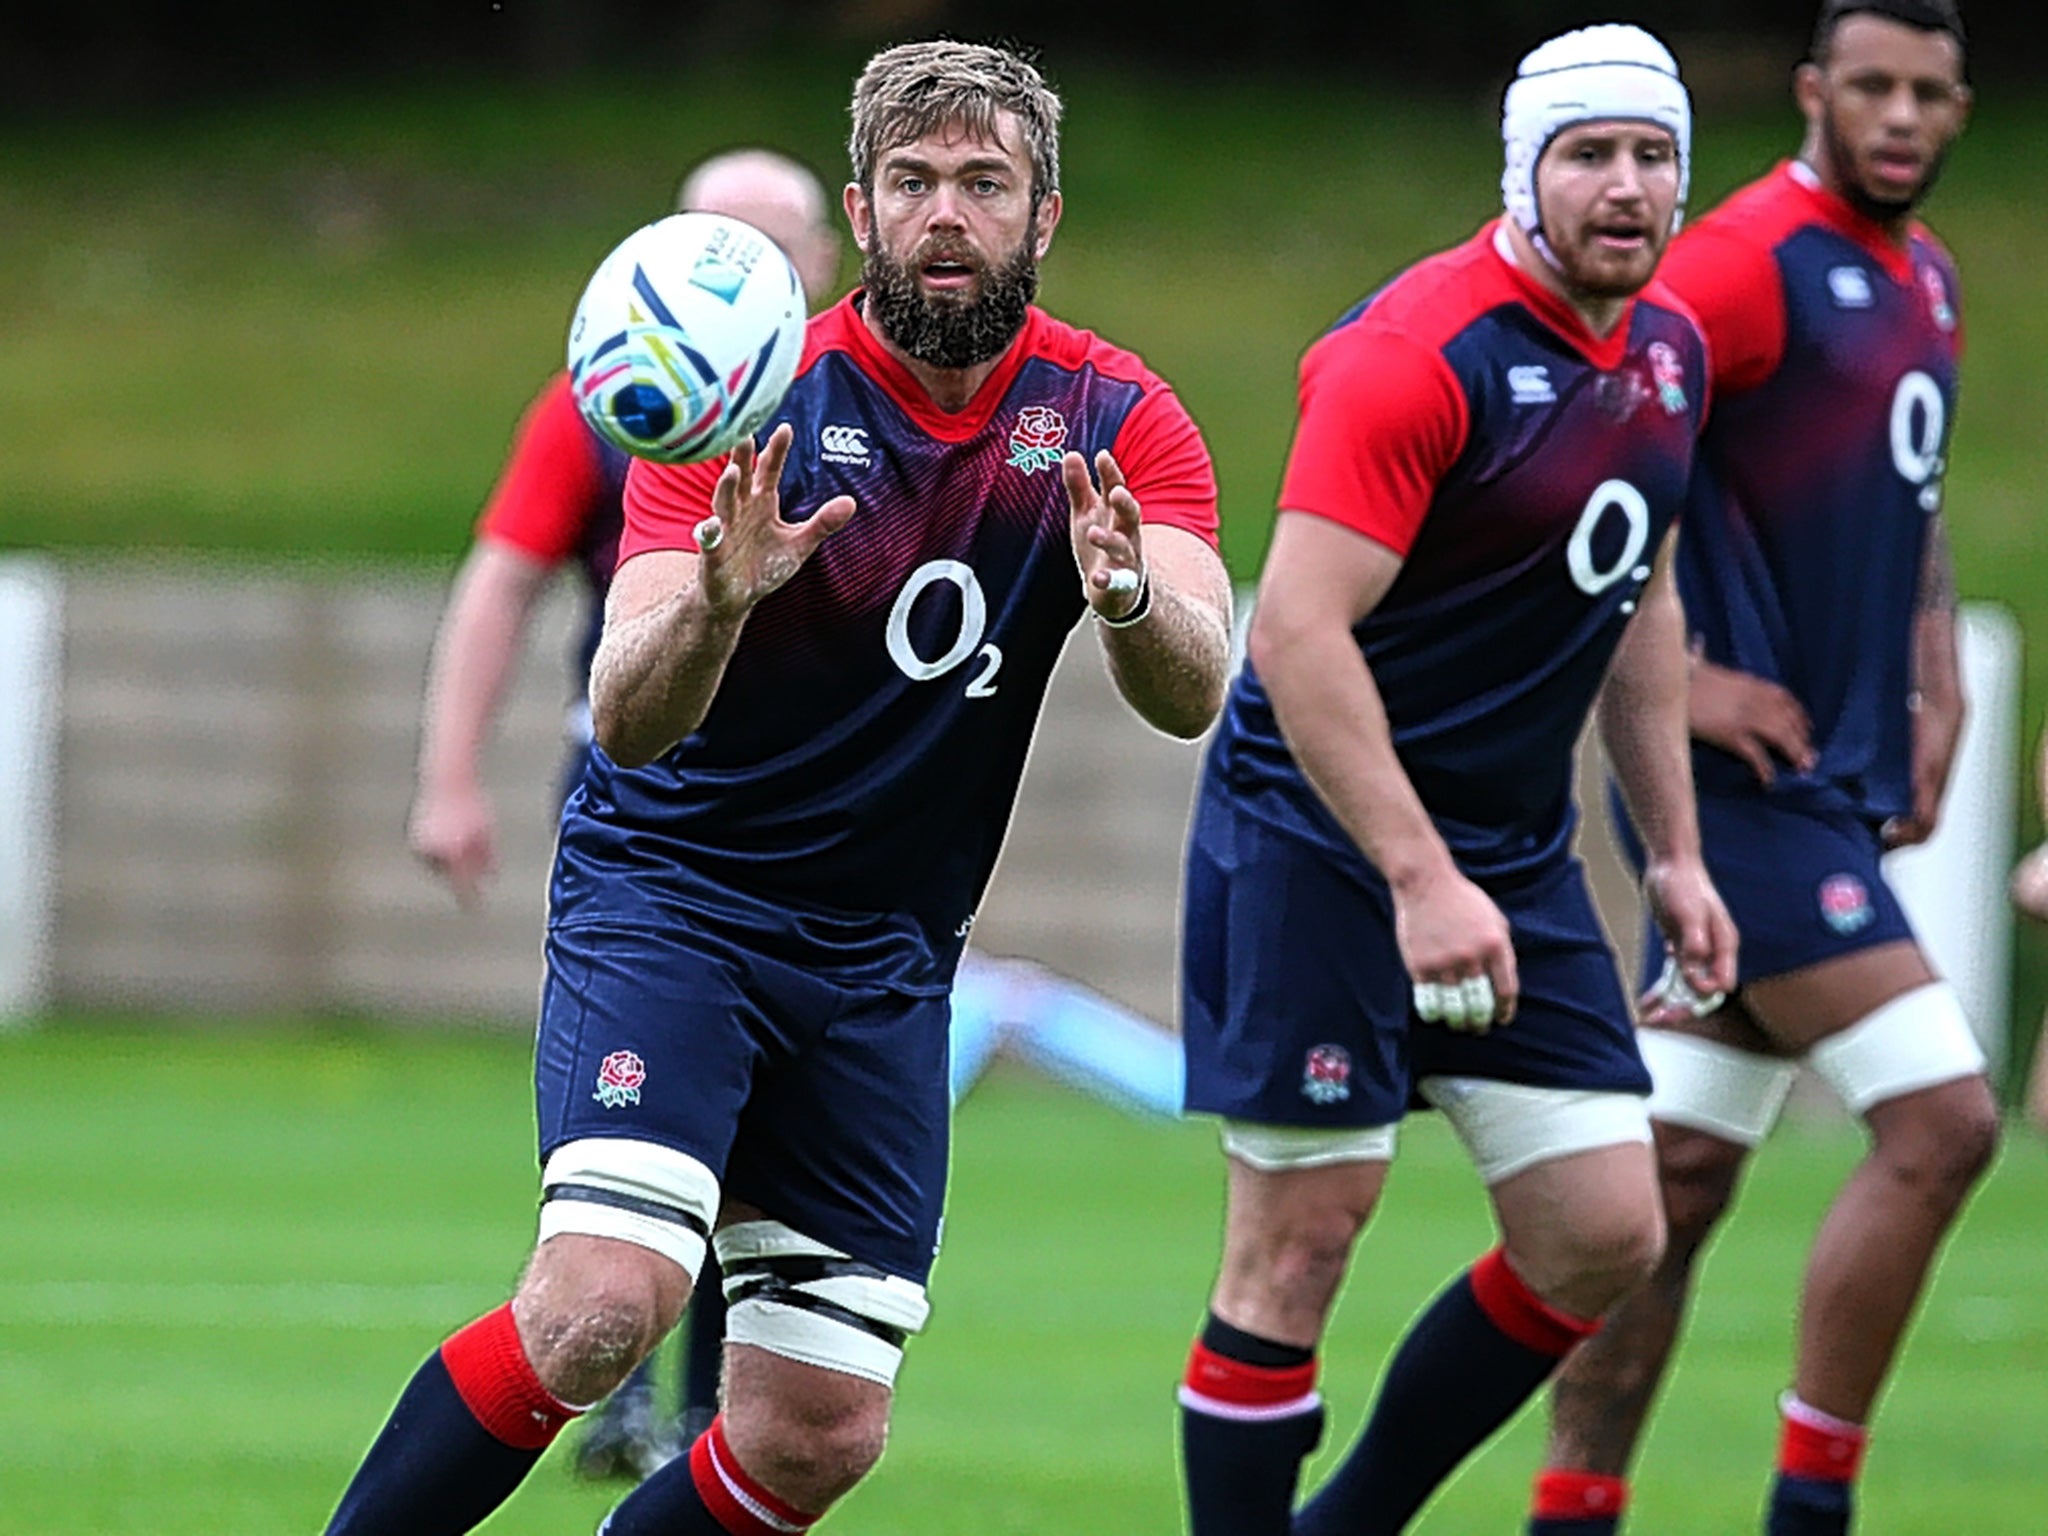 Geoff Parling will boss England’s line-out and put Fiji under pressure at their own throws